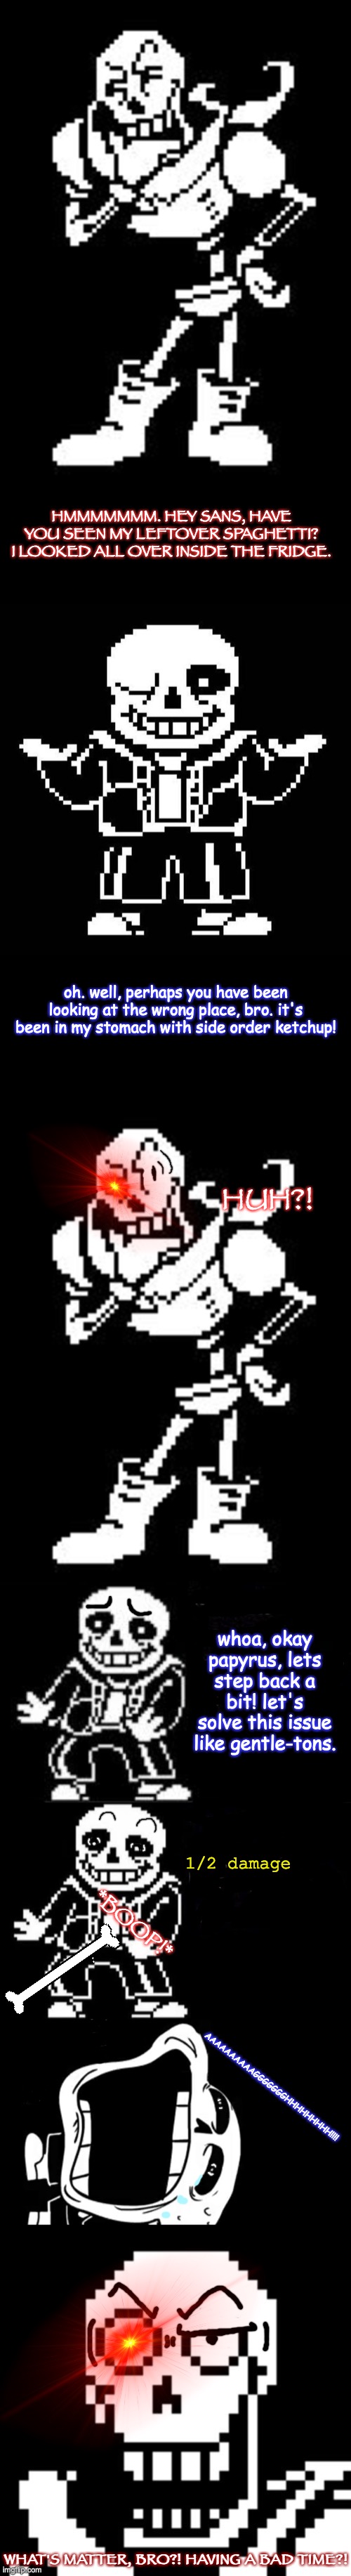 Don't mess with Papyrus' spaghetti! | HMMMMMMM. HEY SANS, HAVE YOU SEEN MY LEFTOVER SPAGHETTI? I LOOKED ALL OVER INSIDE THE FRIDGE. oh. well, perhaps you have been looking at the wrong place, bro. it's been in my stomach with side order ketchup! HUH?! whoa, okay papyrus, lets step back a bit! let's solve this issue like gentle-tons. 1/2 damage; *BOOP!*; AAAAAAAAAAGGGGGGGHHHHHHHHH!!!! WHAT'S MATTER, BRO?! HAVING A BAD TIME?! | image tagged in papyrus thinking undertale,sans undertale,woah hey pal lets back it up a bit,undertale,comics/cartoons,memes | made w/ Imgflip meme maker